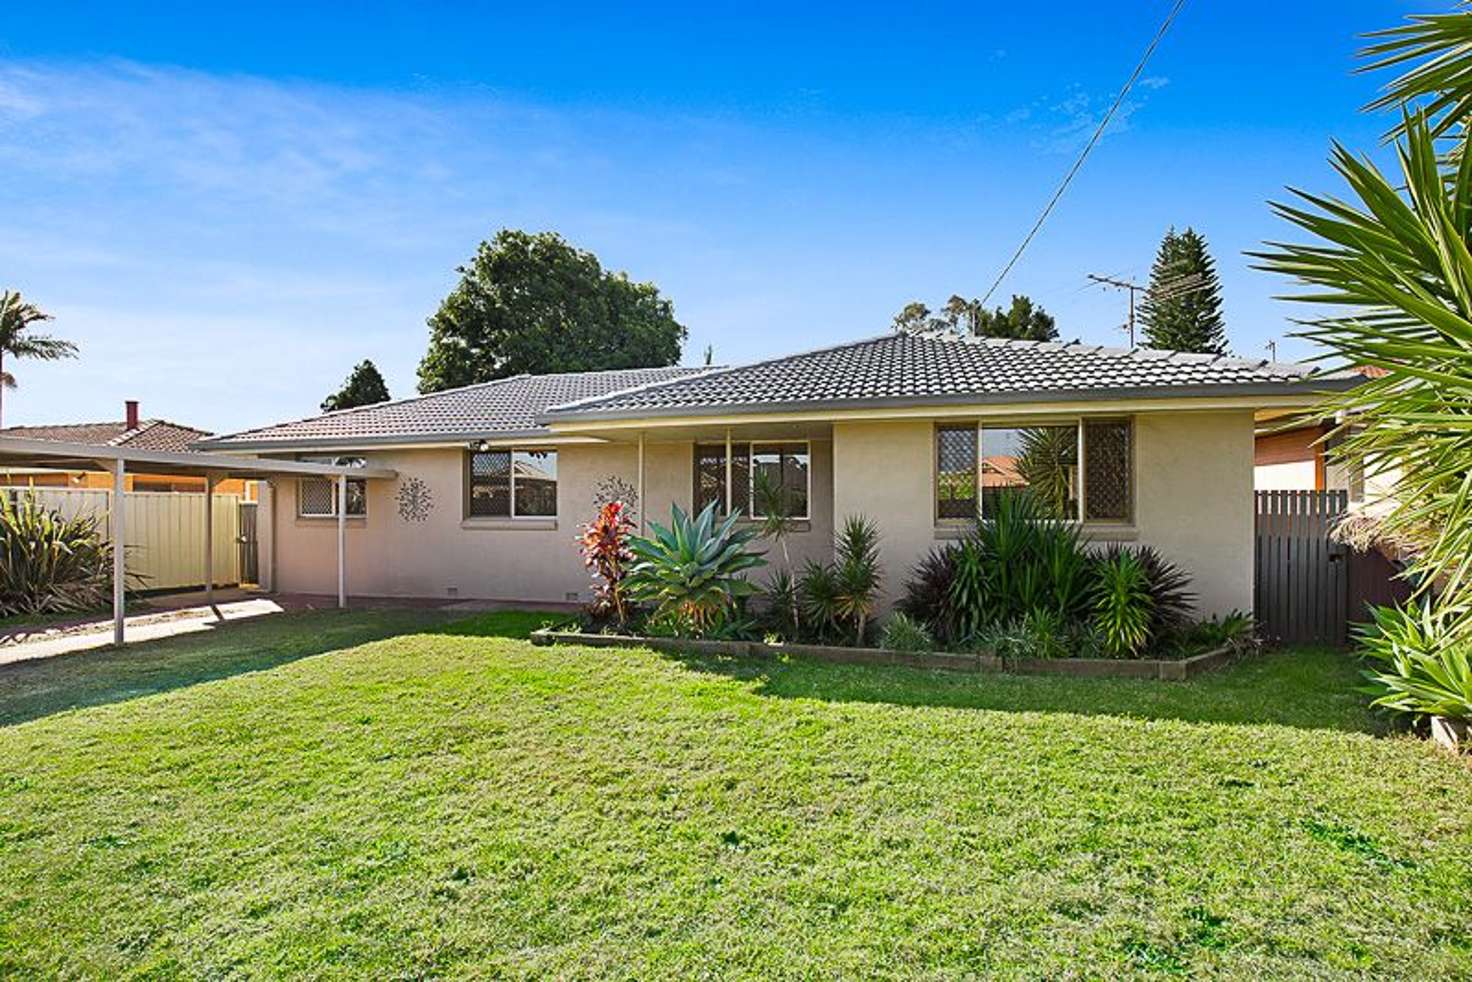 Main view of Homely house listing, 465 Stenner Street, Harristown QLD 4350